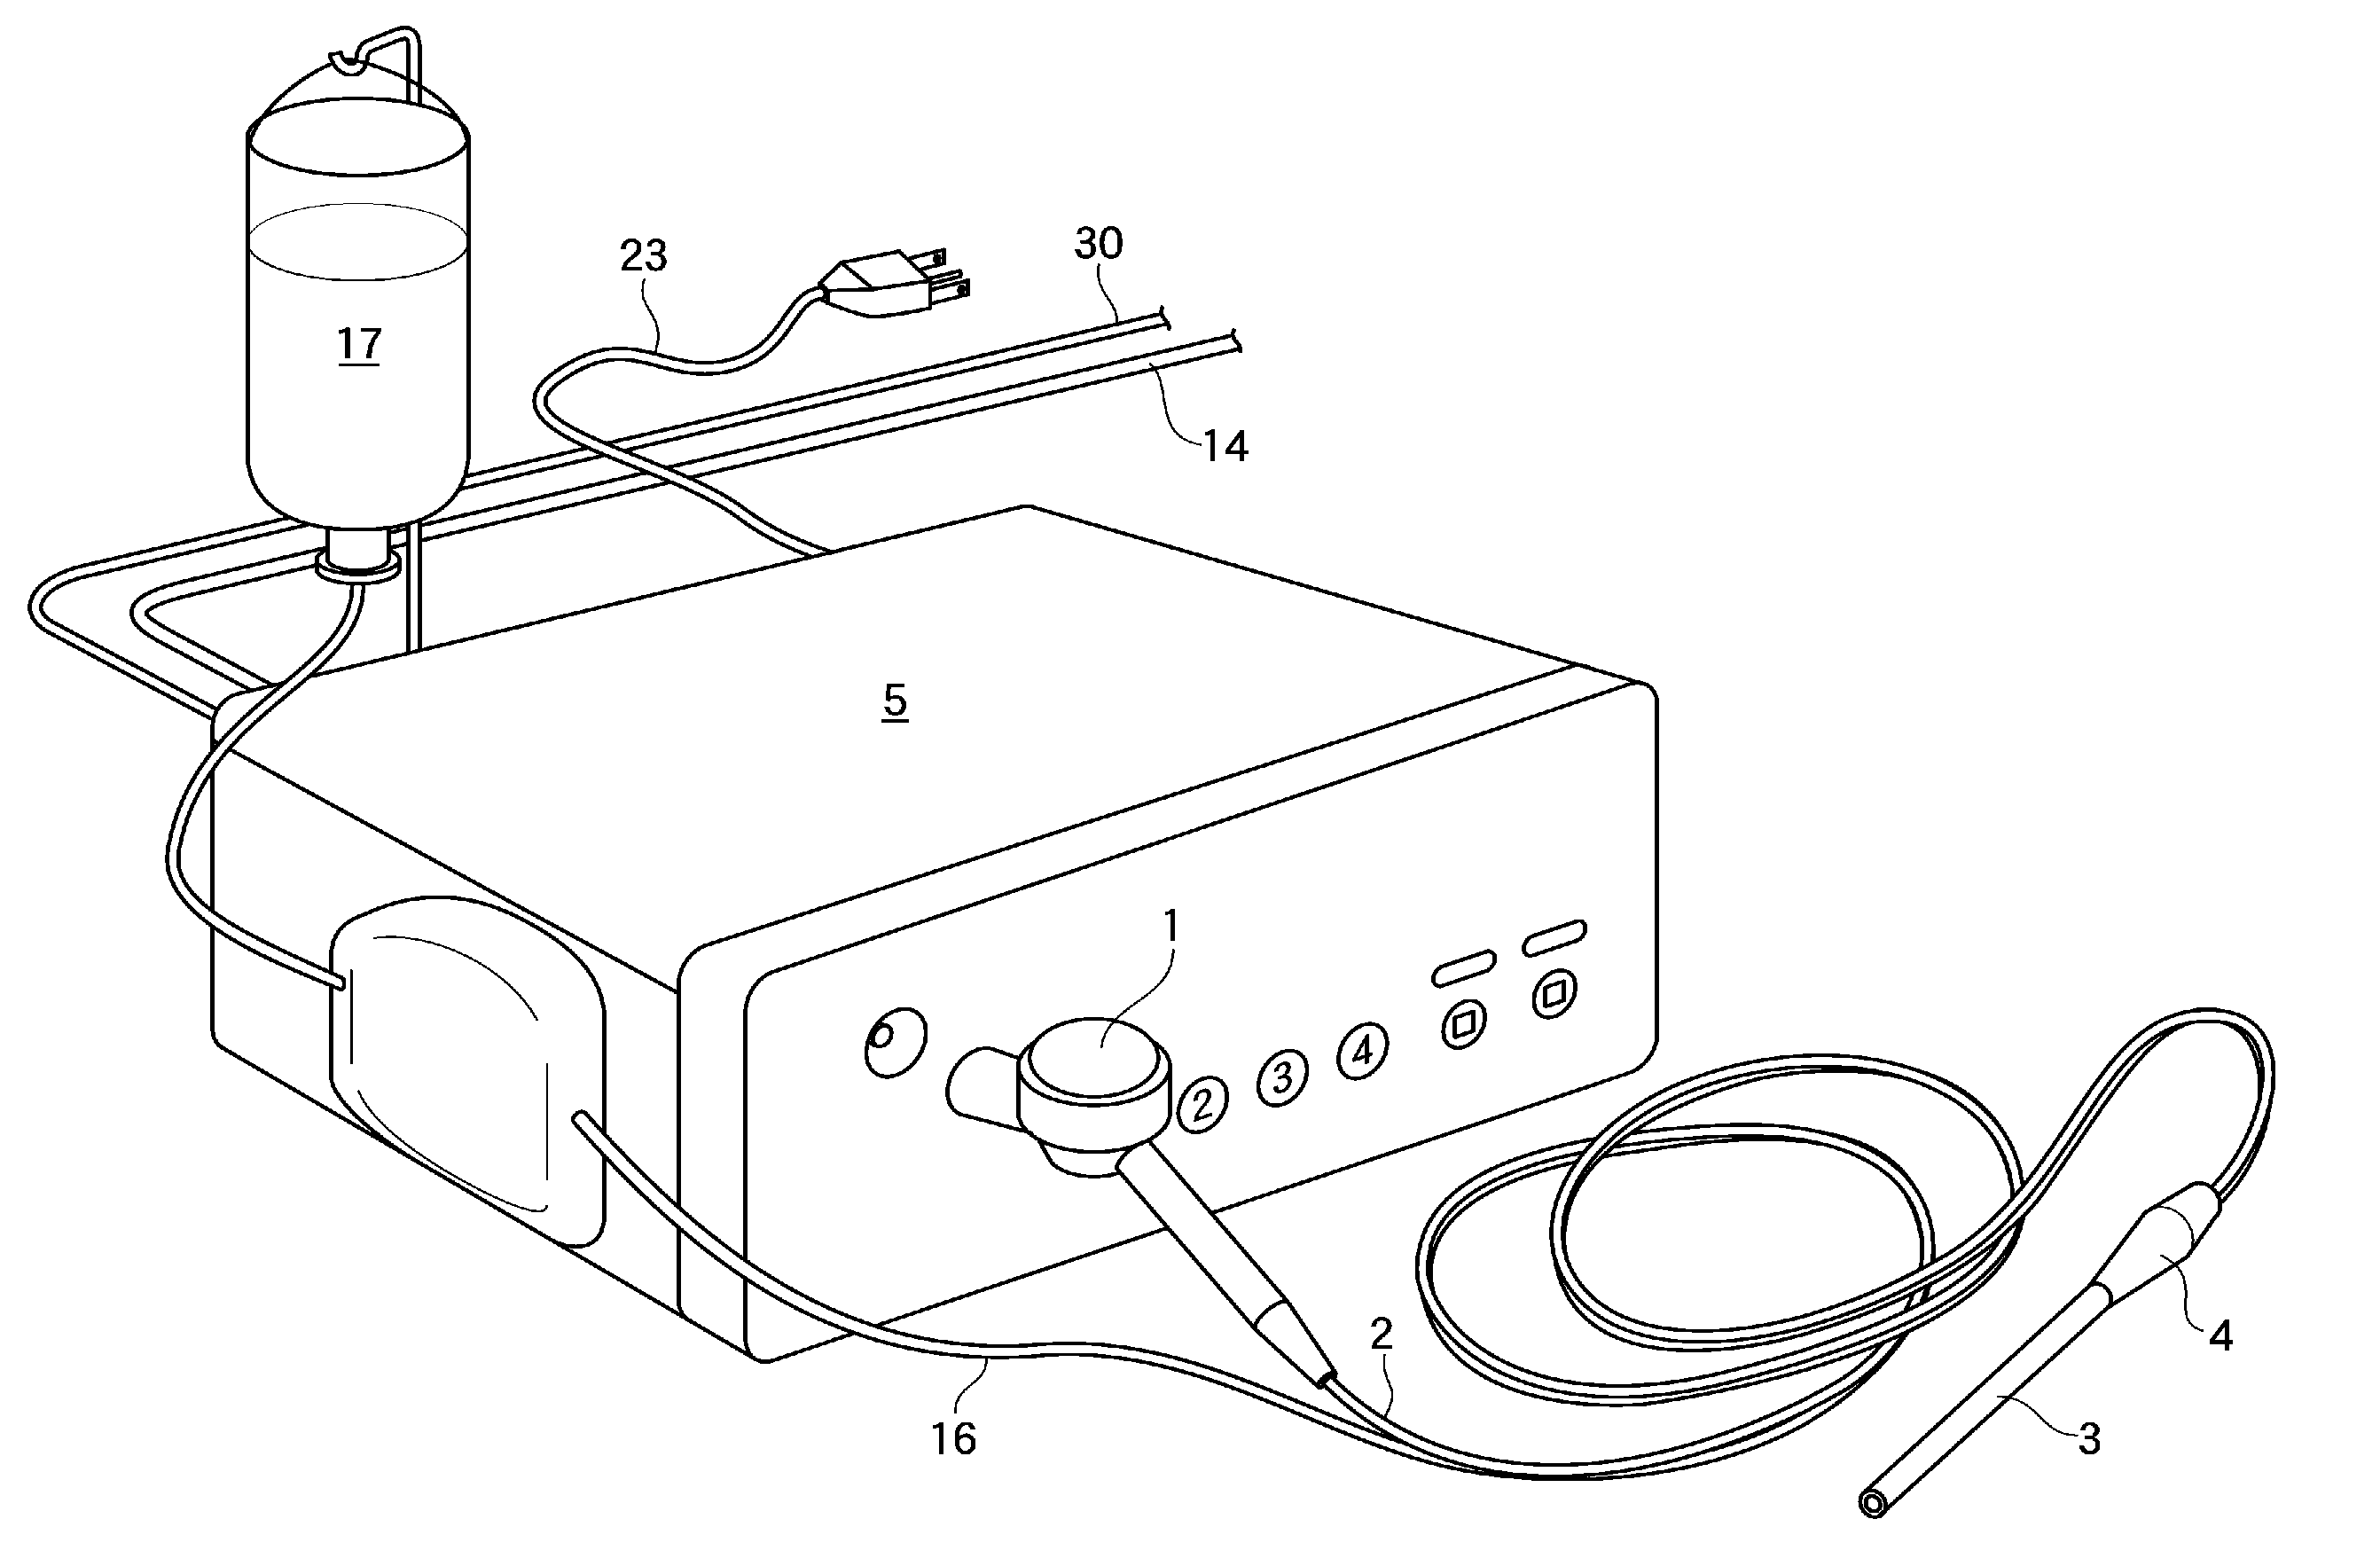 Apparatus for Hemostasis and Adhesion Prevention for Use in Endoscopic Surgery